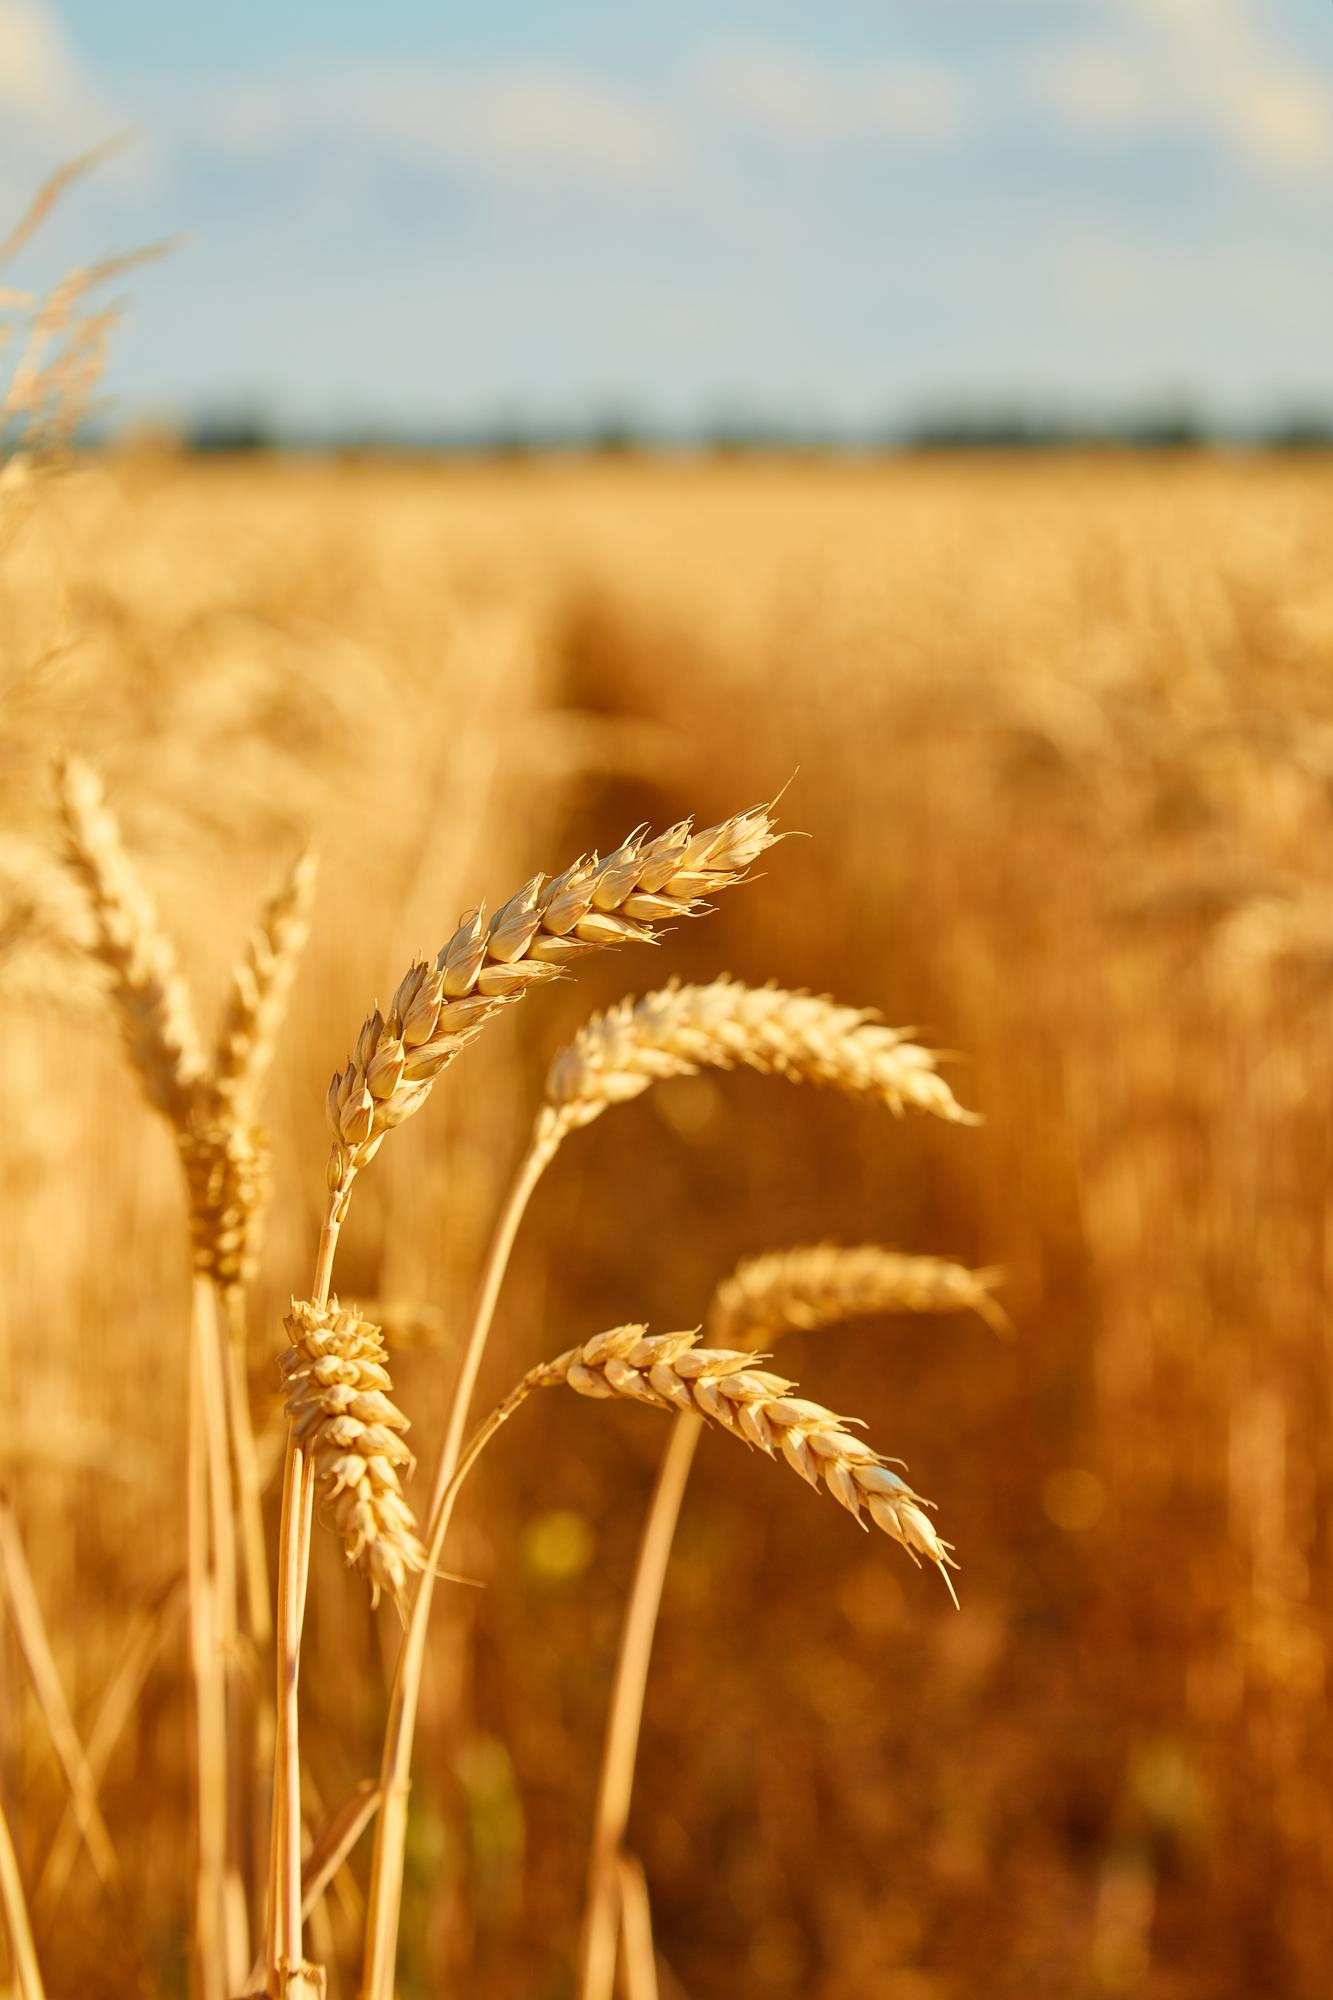 field-with-spikelets-close-up-background-with-wheat-spikelets